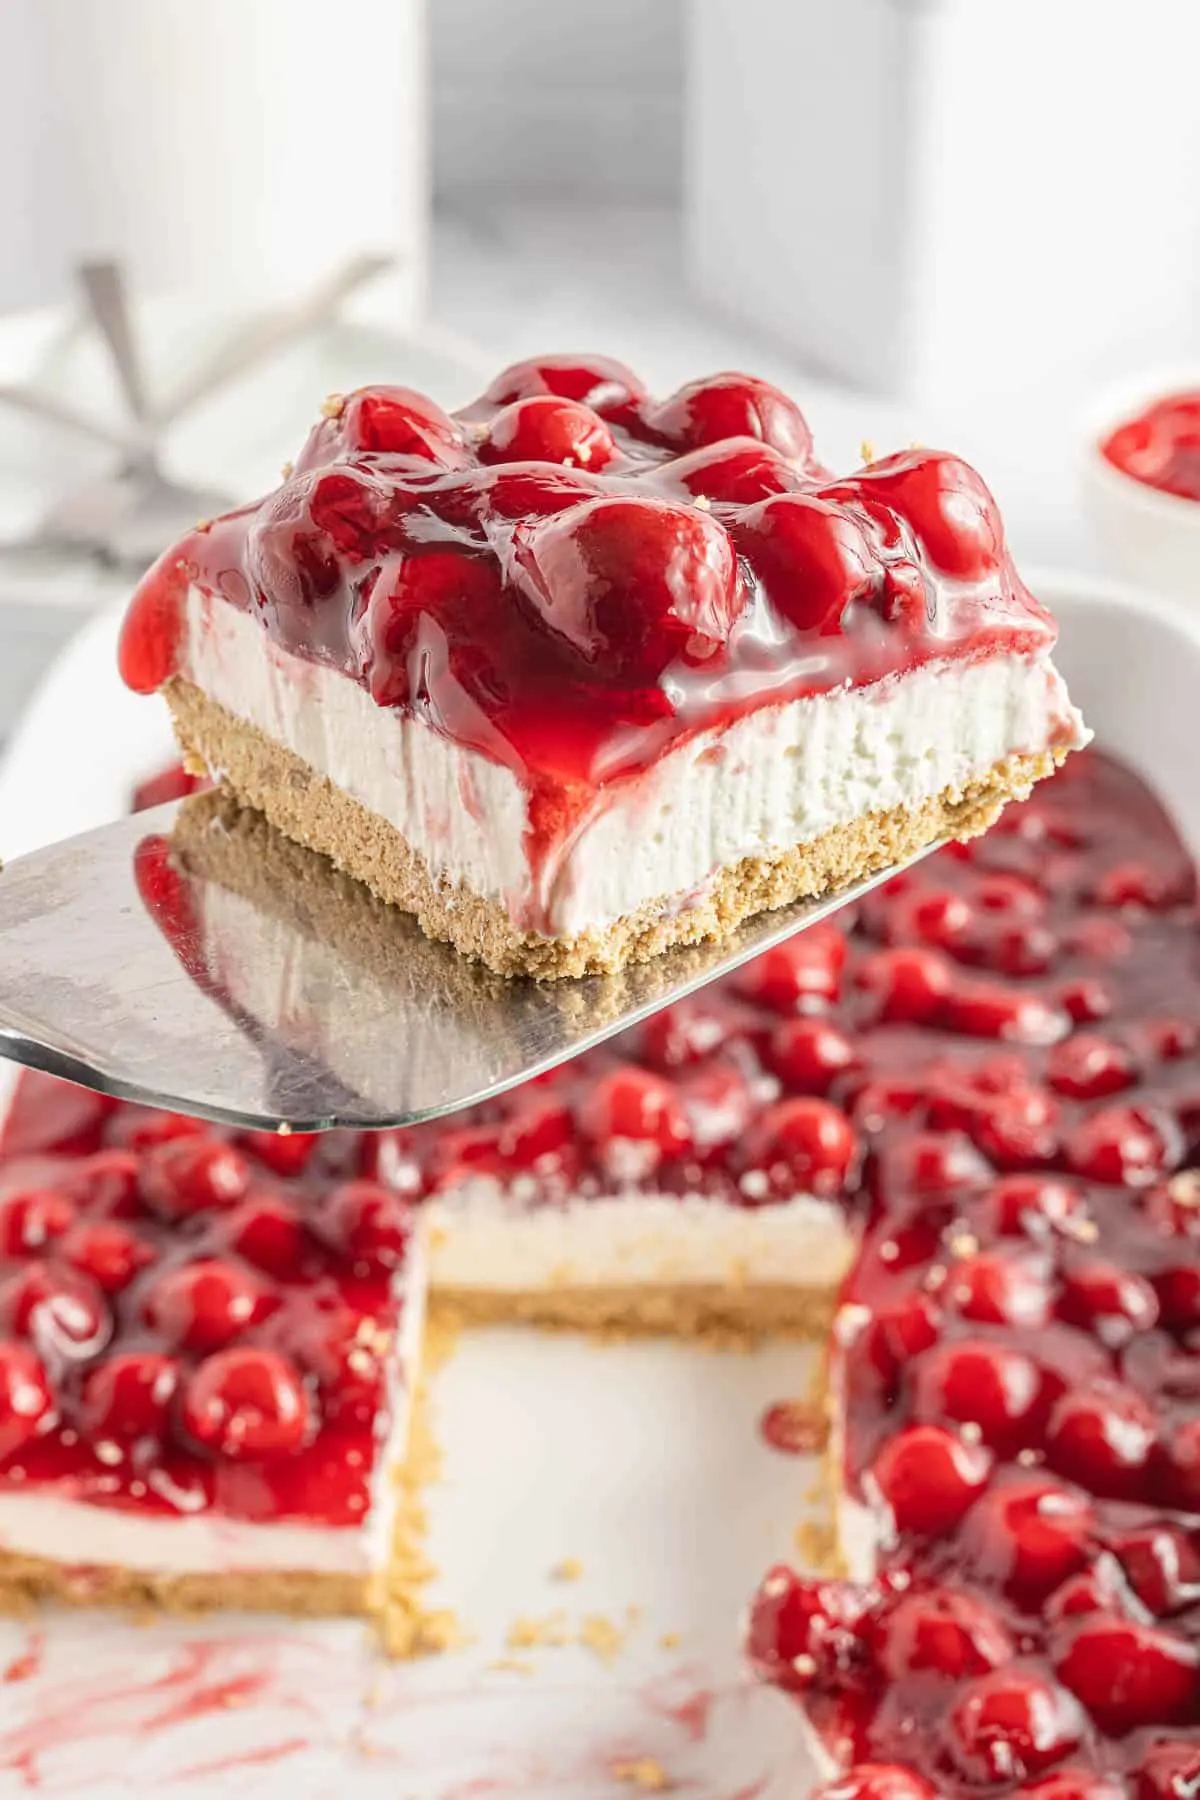 Cherry Delight is an easy no bake dessert with a graham crumb base, cream cheese and Cool Whip filling and topped with canned cherry pie filling.